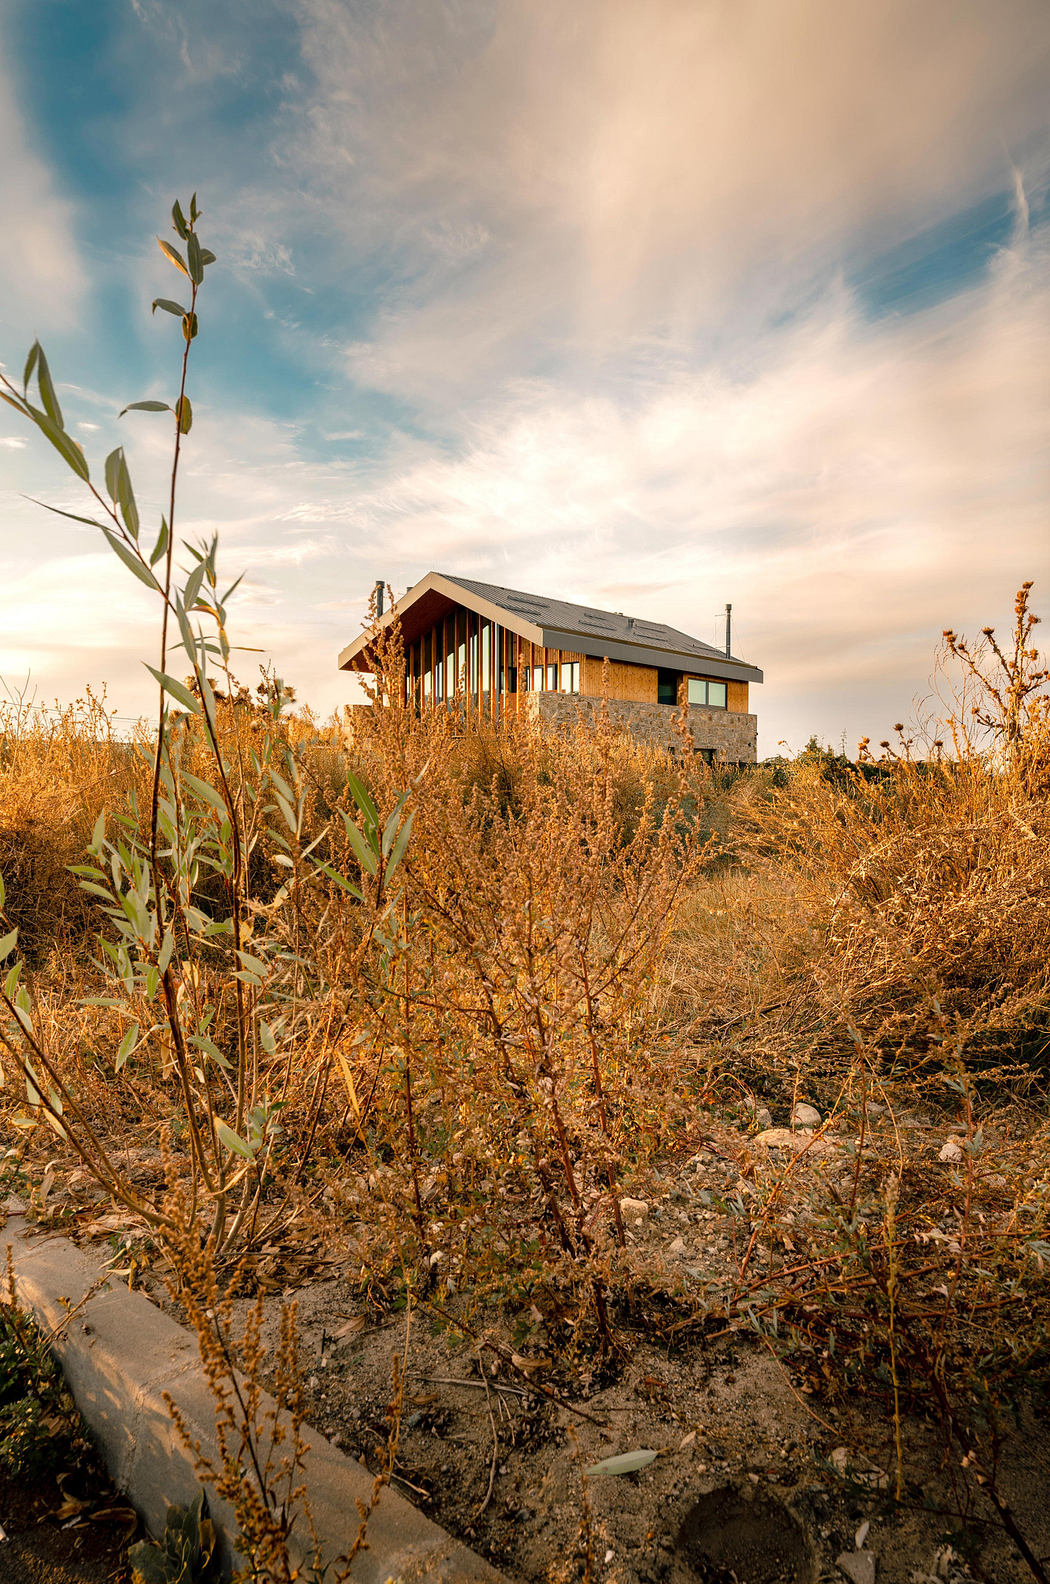 Modern house on a hillside with dry grass and a sunset sky.